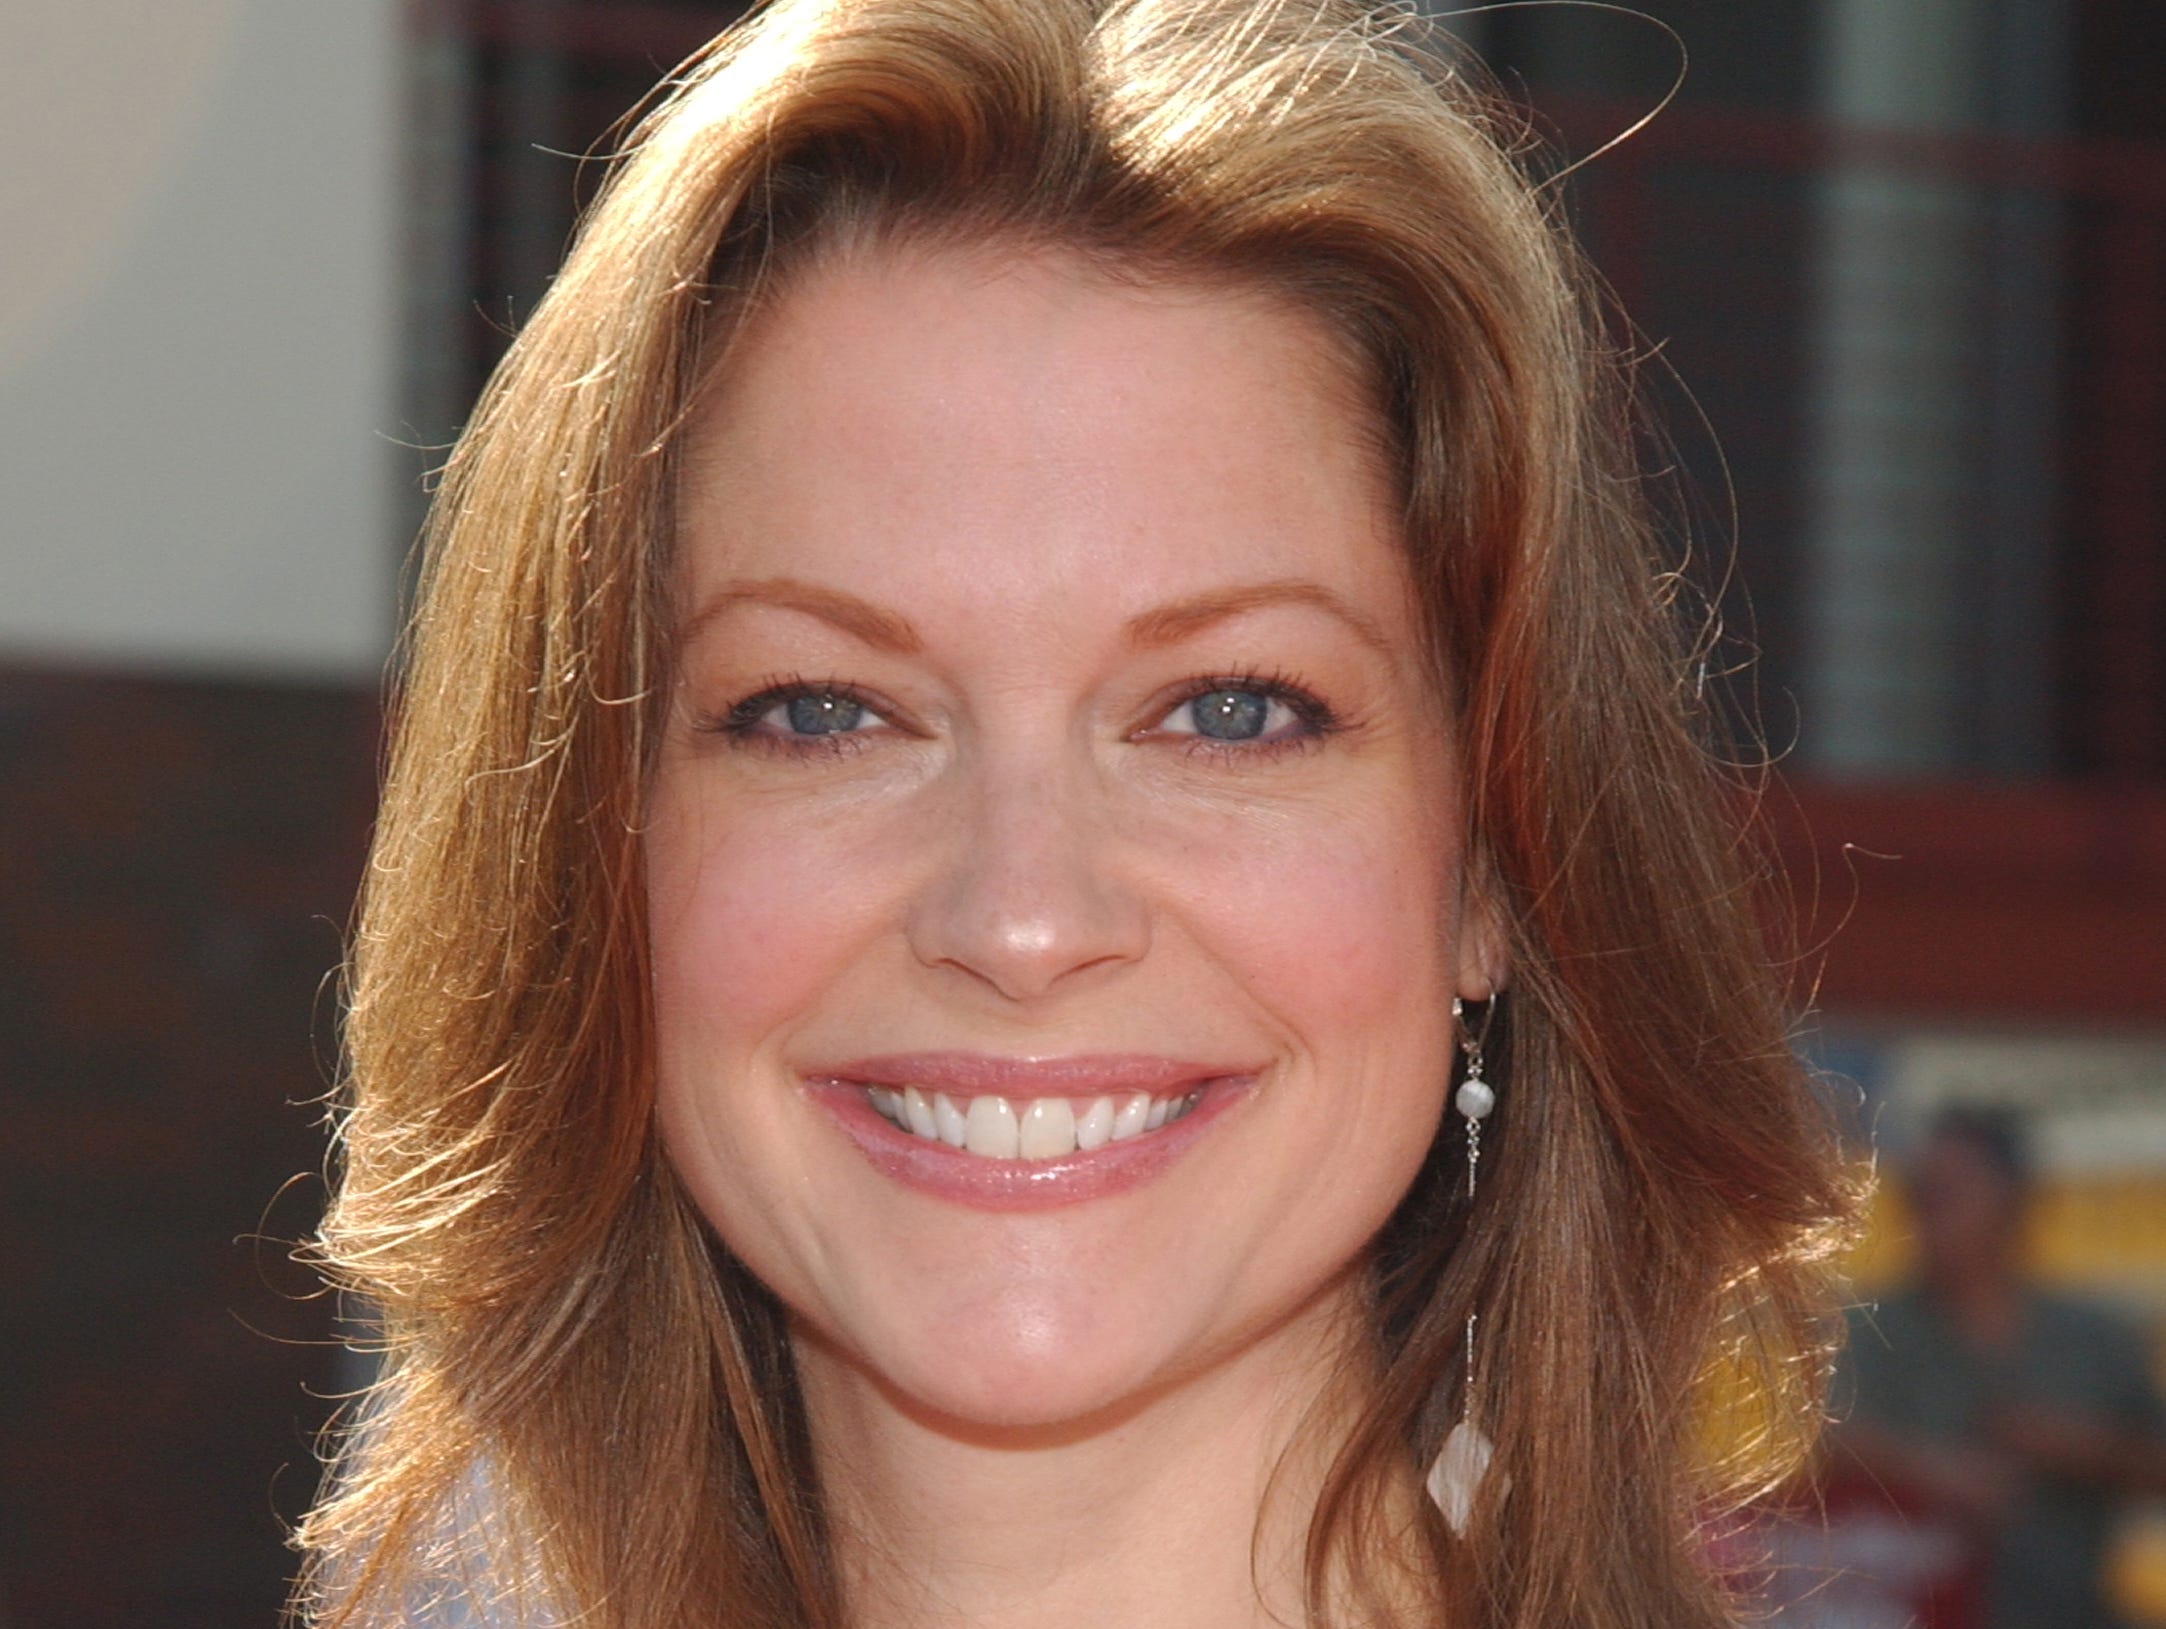 Actress Lisa Lynn Masters, who worked on shows such as 